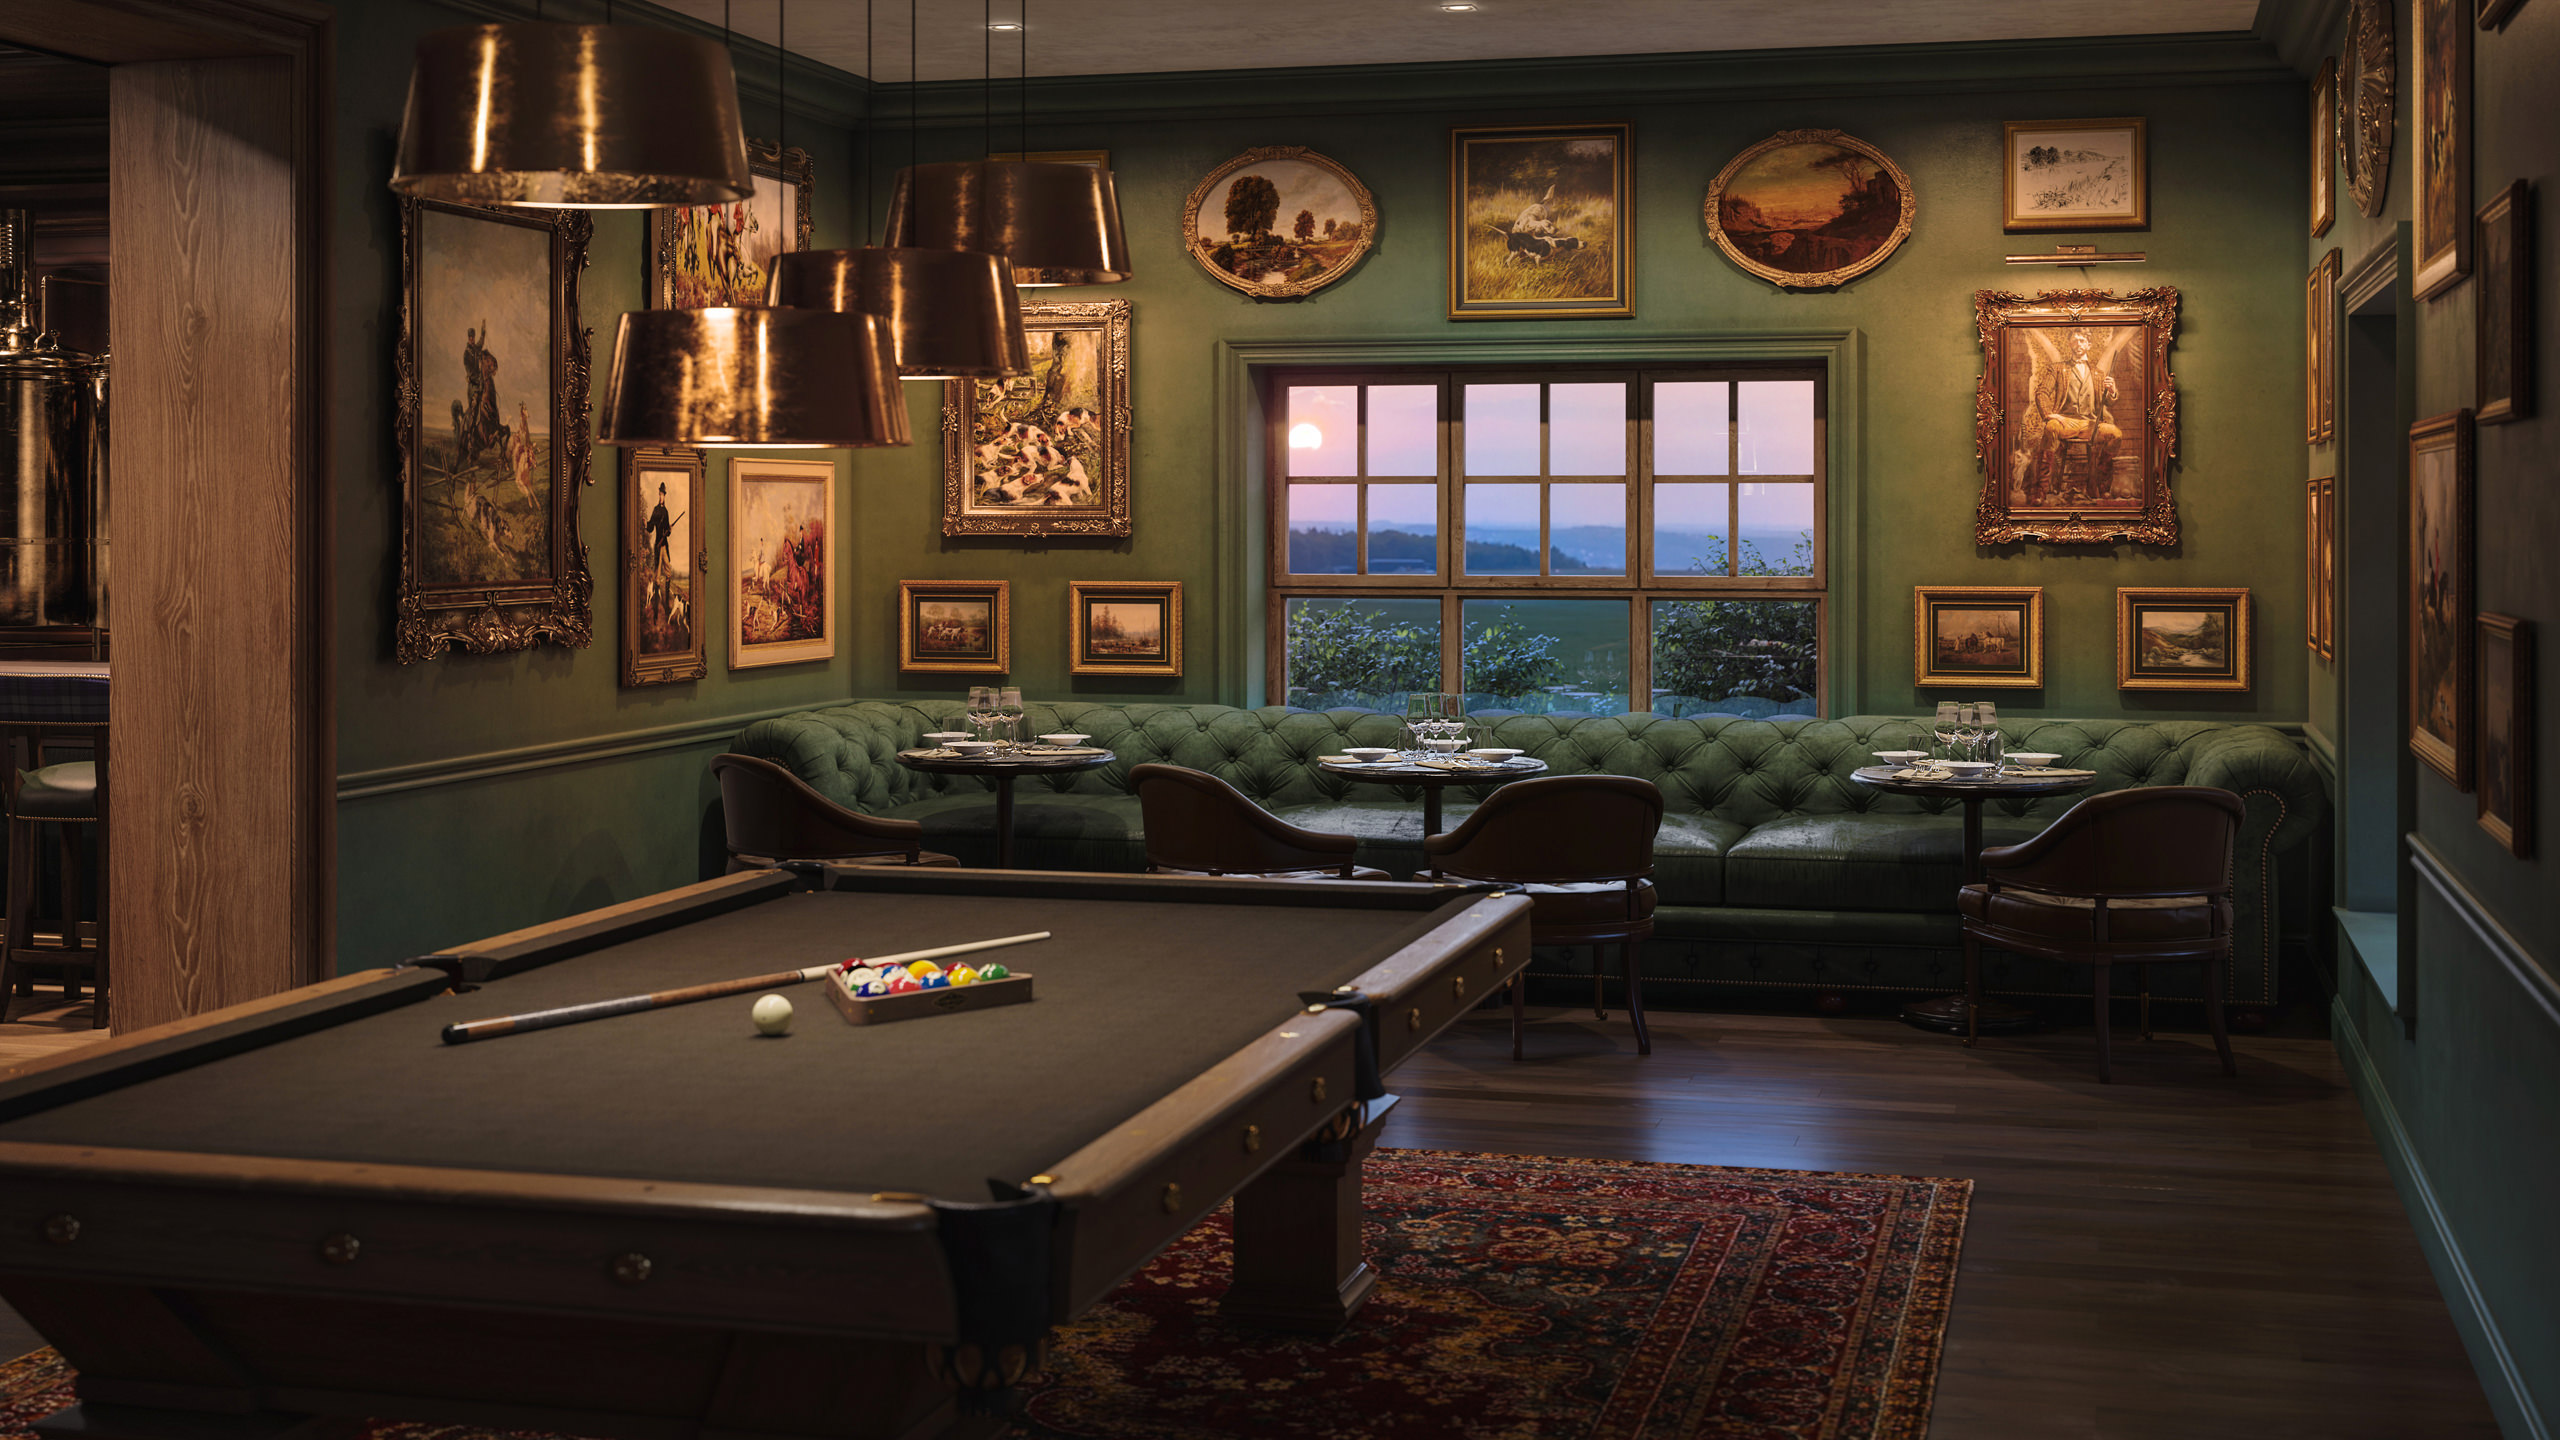 Games area 3D visualization with a pool table in the front and a spacious seating area in the back surrounded by gold-framed art